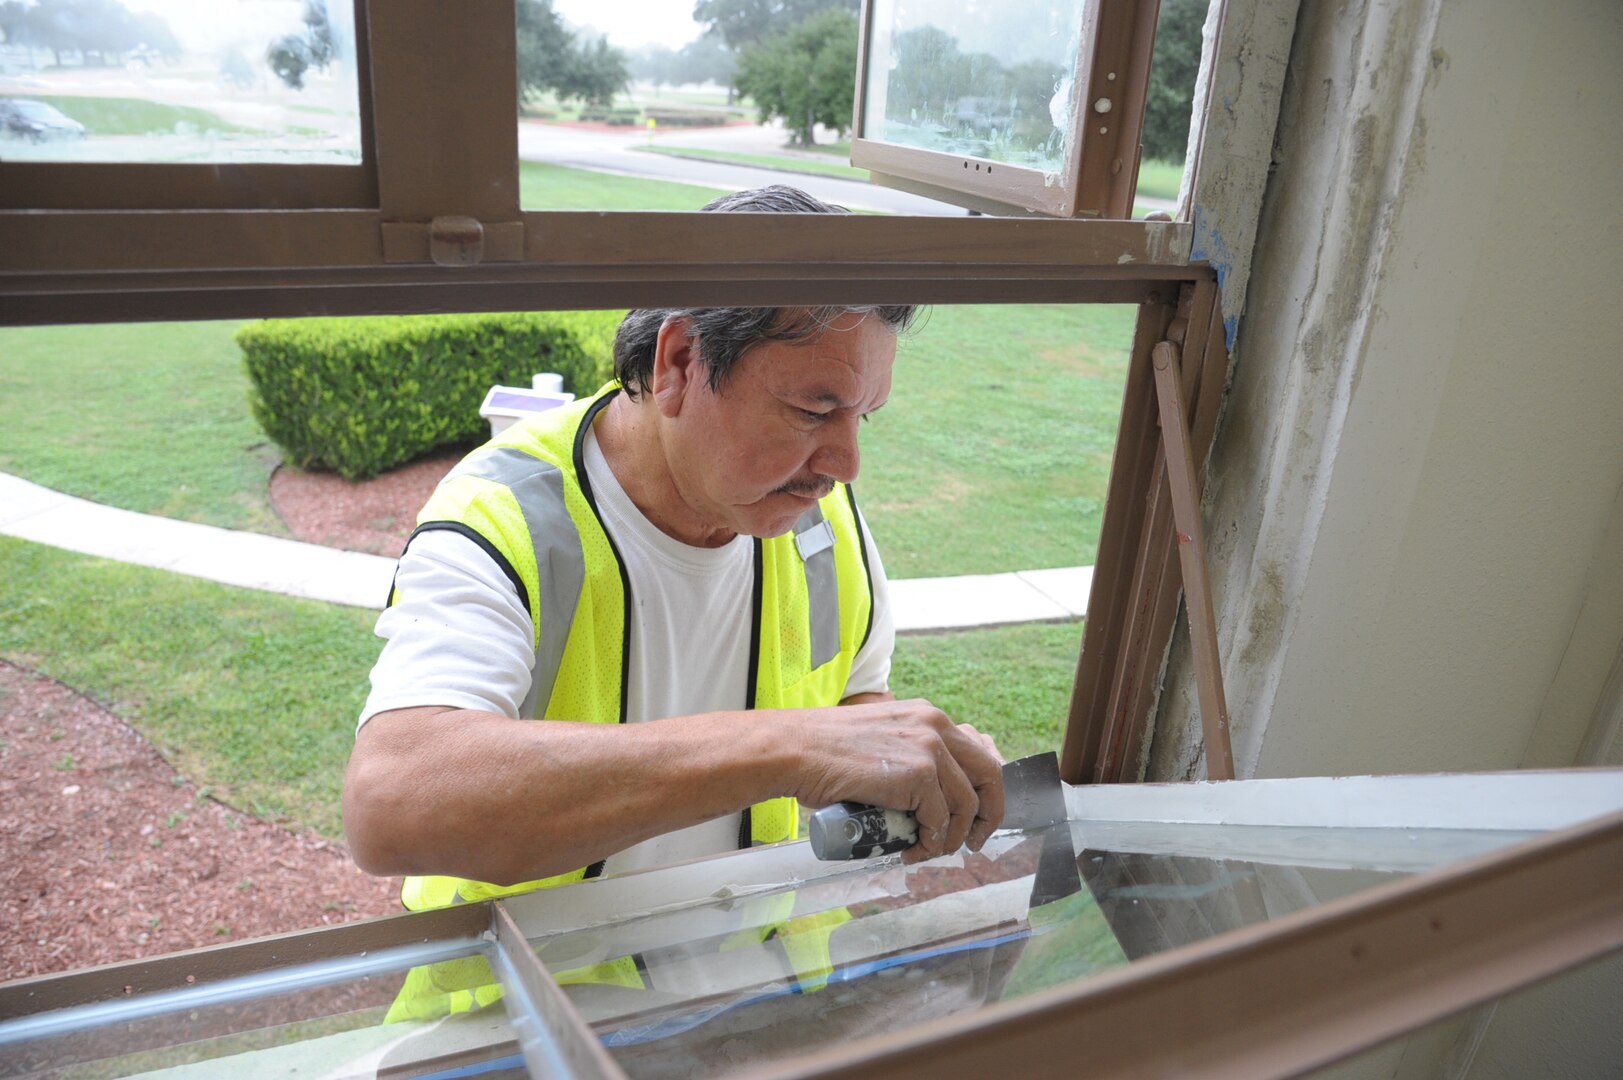 Eddie Contreras glazes a window at the Joint Base San Antonio-Randolph Taj Mahal, during its renovation process Oct. 6, 2016.  The renovation is part of a $10 million project designed the improve the Taj Mahal, which houses the headquarters for the 12th Flying Training Wing and the 12th Mission Support Group.  